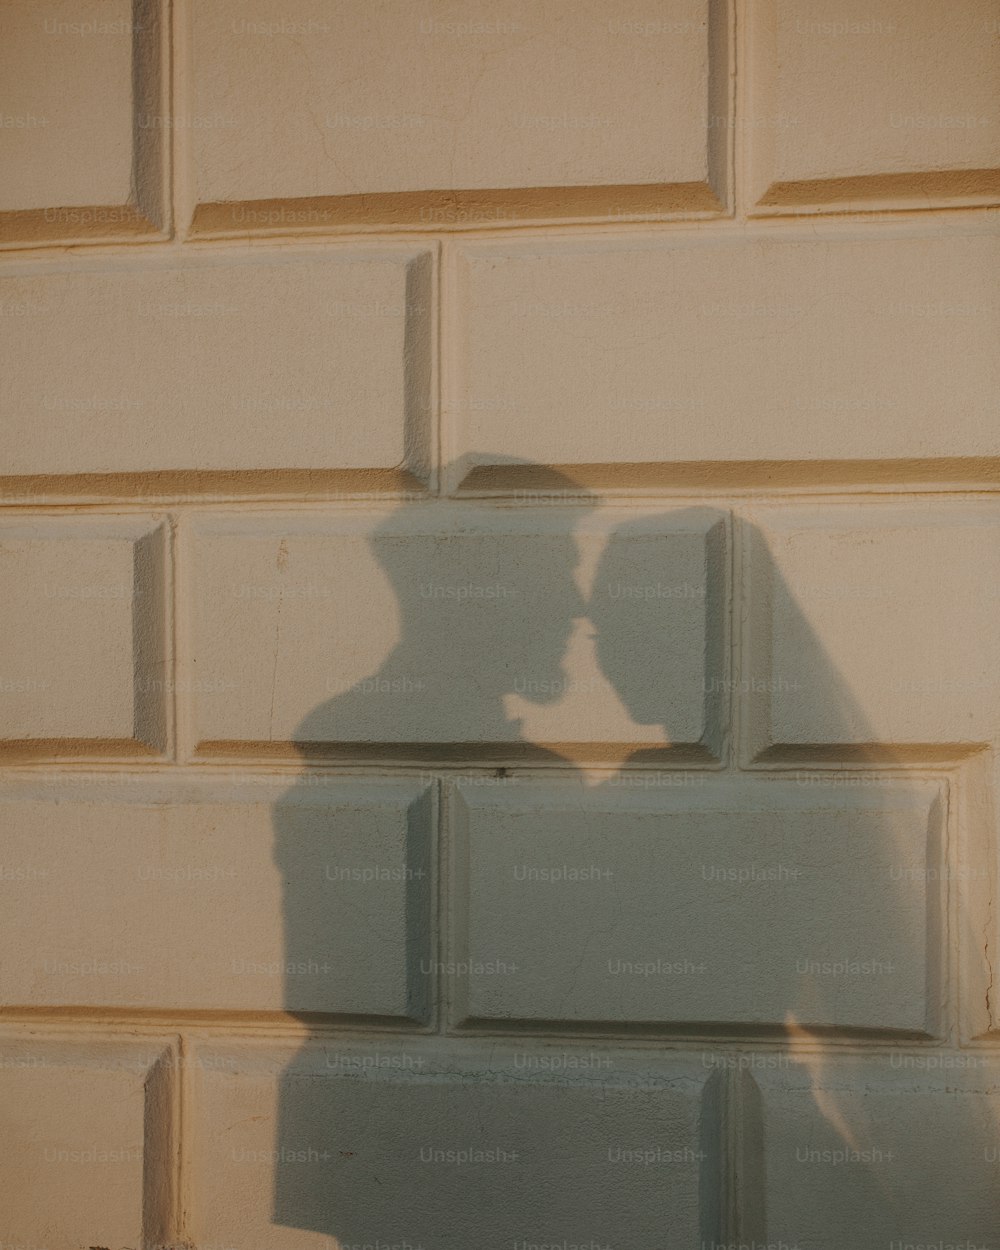 a shadow of a person on a brick wall